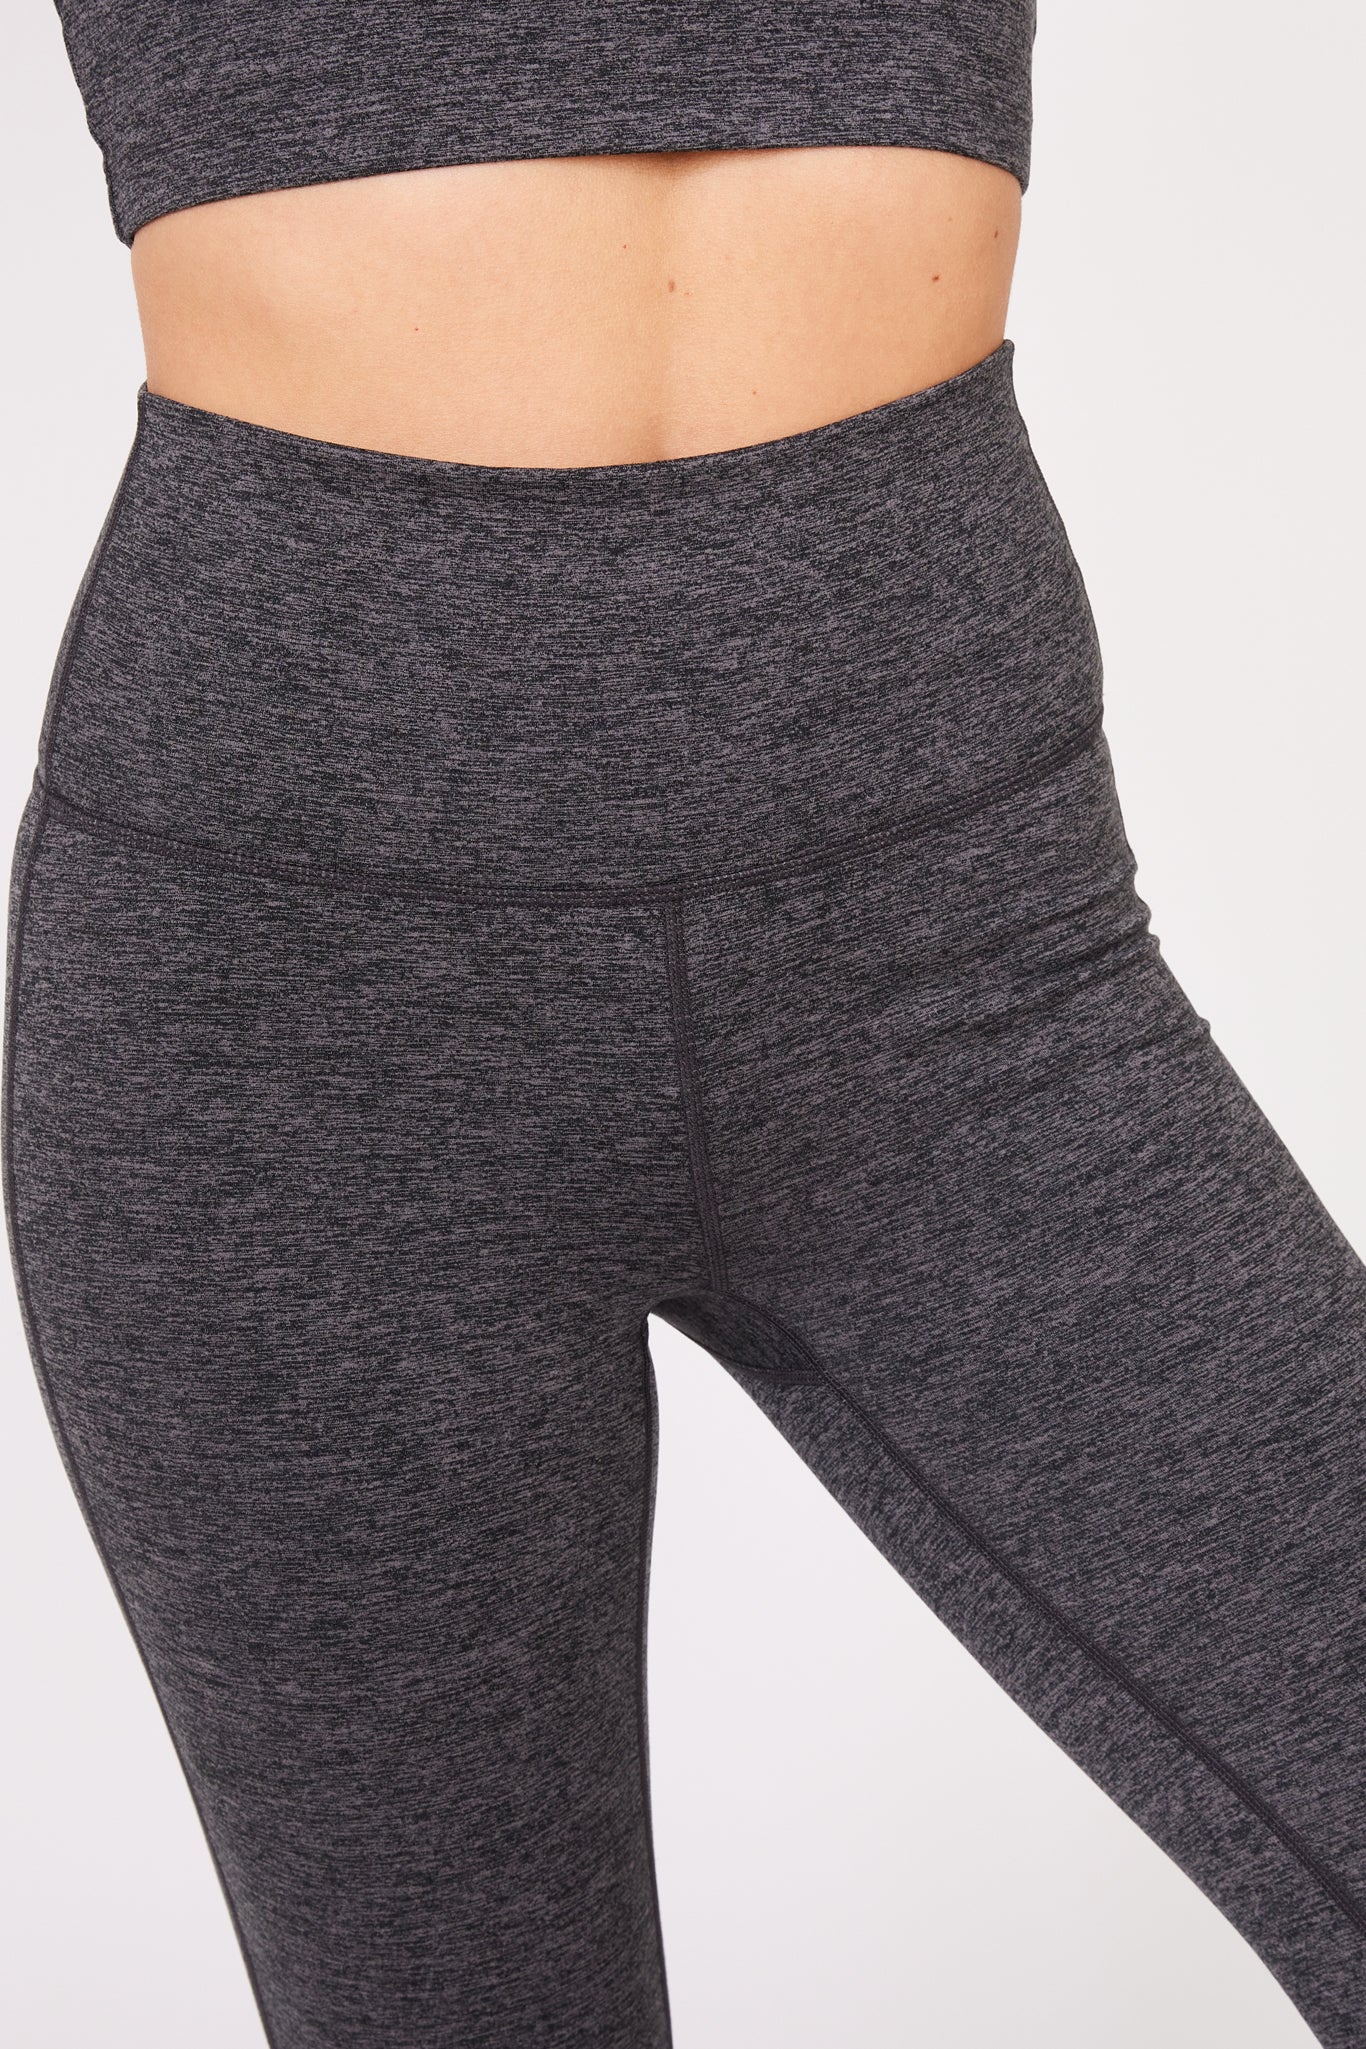 Ladies Soft Ribbed Legging, S Charcoal Grey Heather 